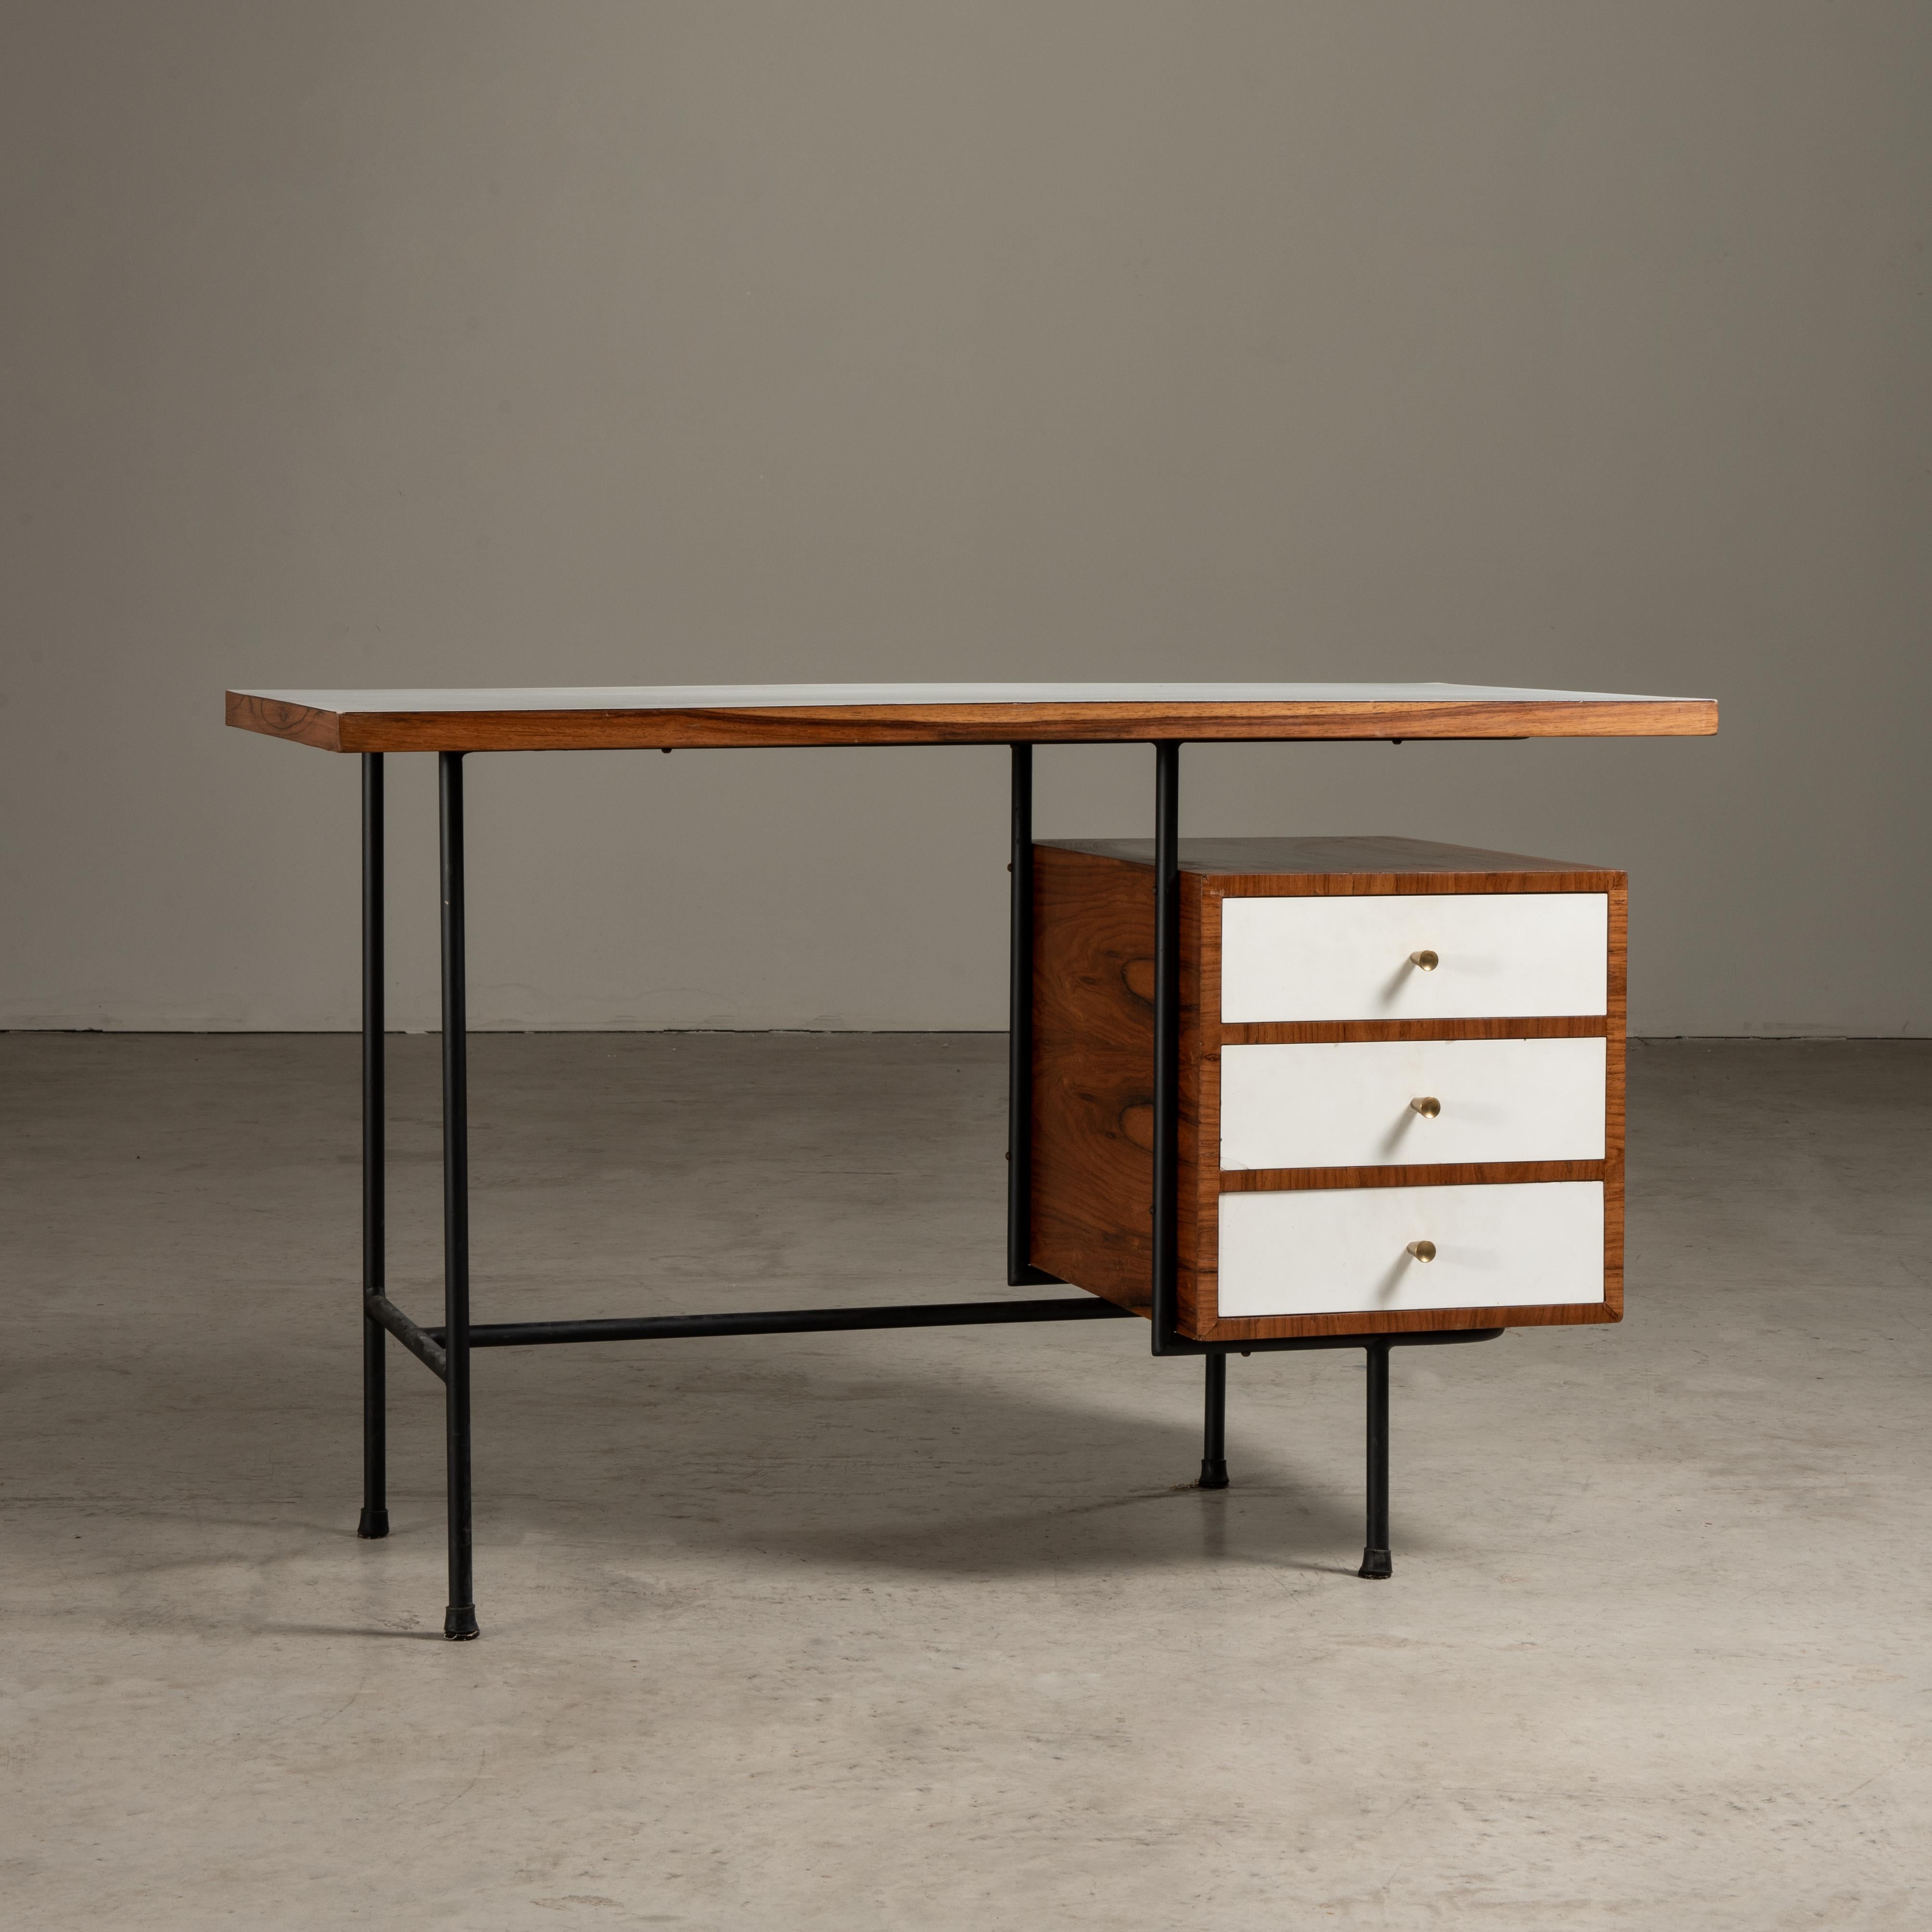 20th Century Architectural Desk in Iron and Wood, by Unilabor, Brazilian Mid-Century Modern   For Sale